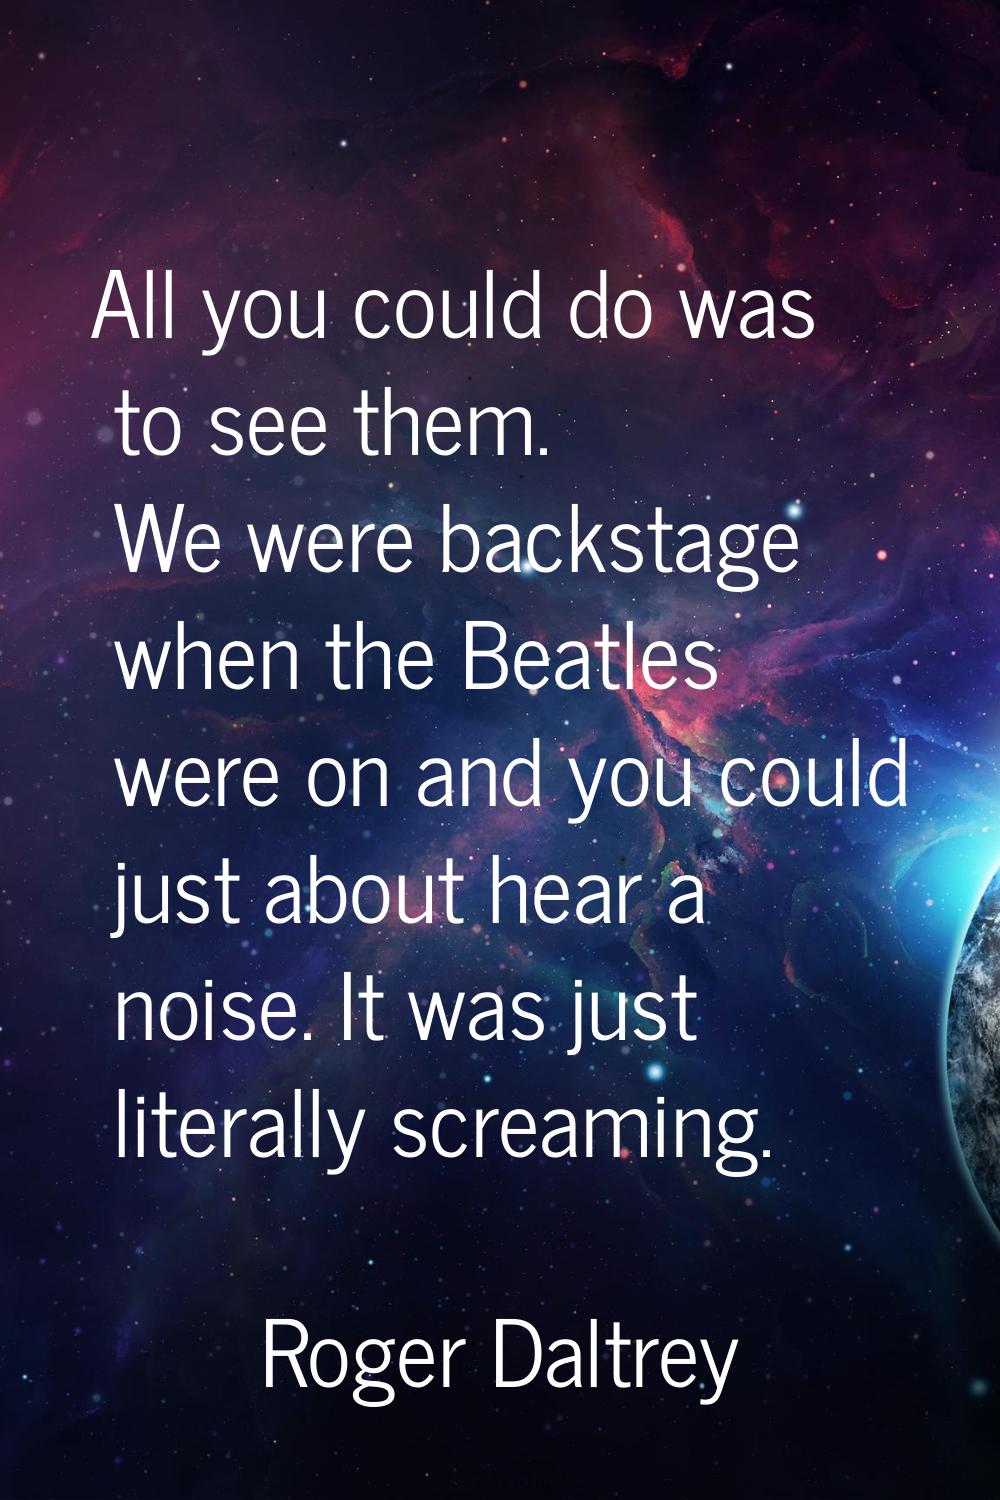 All you could do was to see them. We were backstage when the Beatles were on and you could just abo